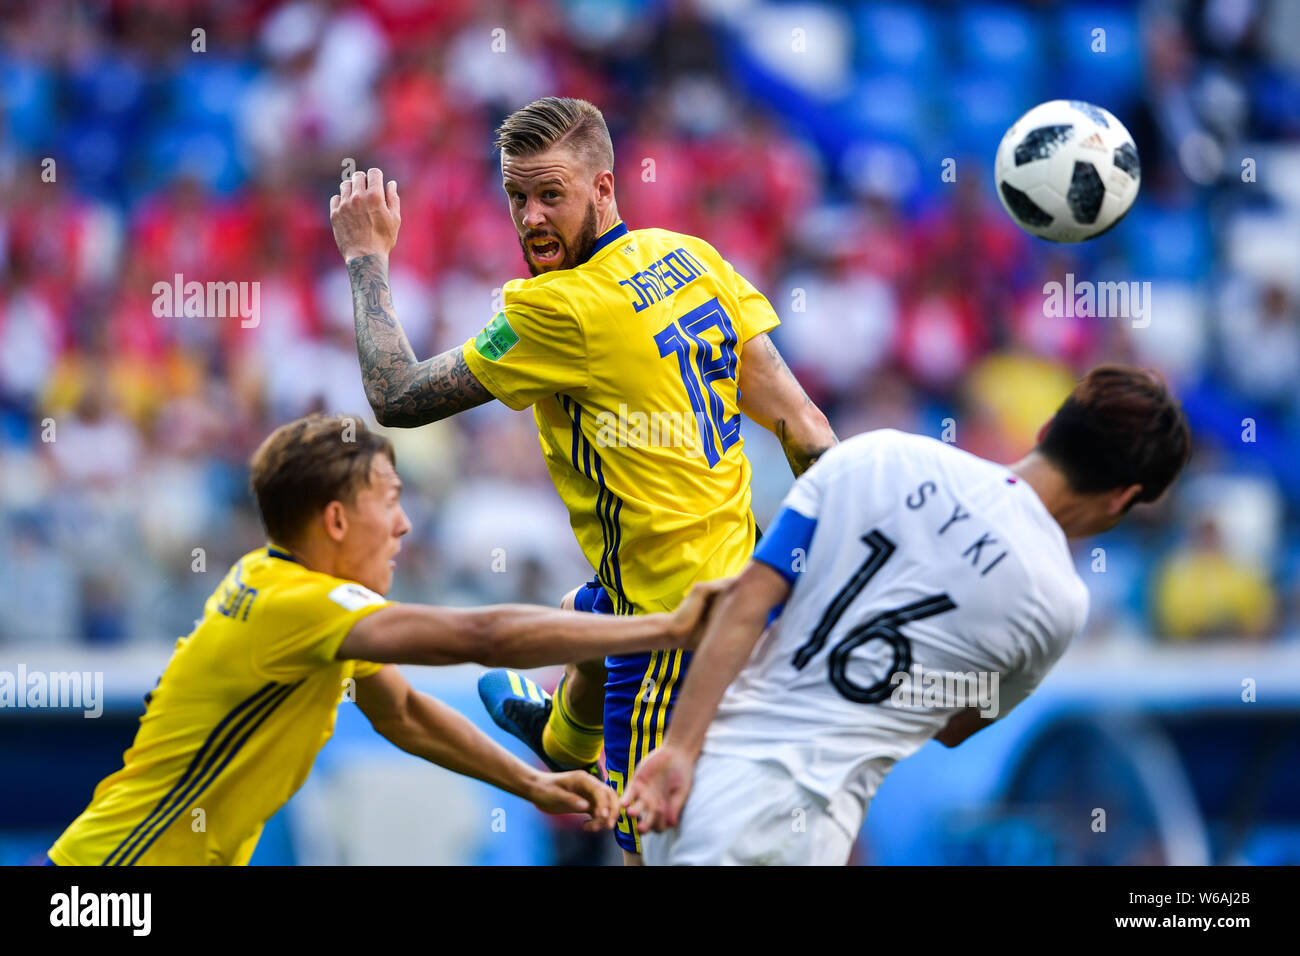 Pontus Jansson of Sweden, center, challenges Ki Sung-yueng of South Korea in their Group F match during the FIFA World Cup 2018 in Nizhny Novgorod, Ru Stock Photo